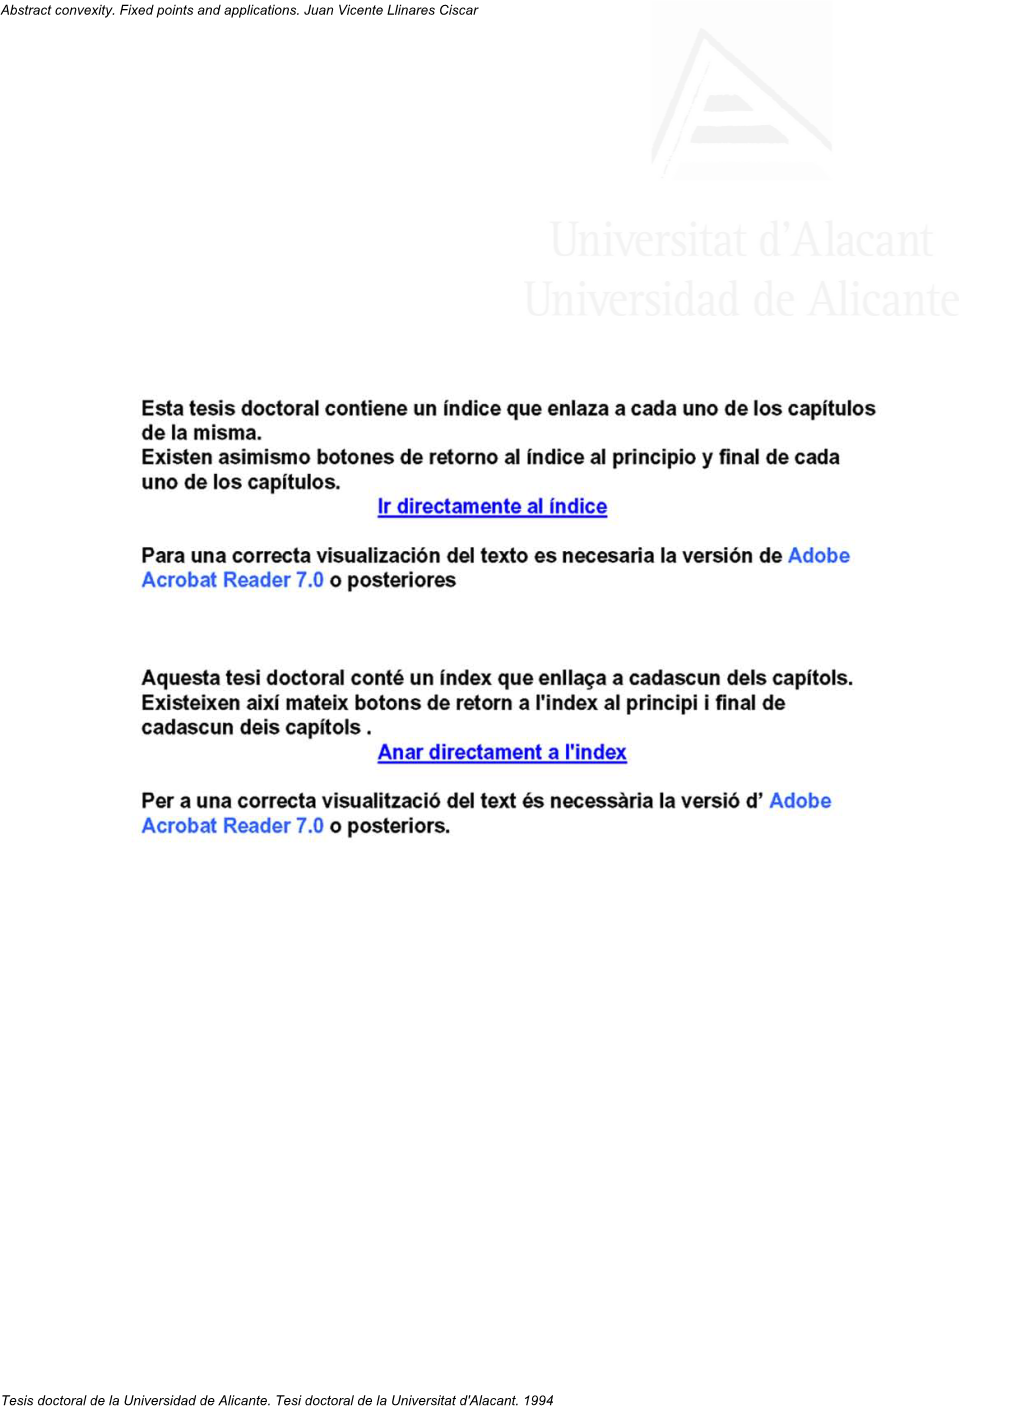 Abstract Convexity. Fixed Points and Applications. Juan Vicente Llinares Ciscar